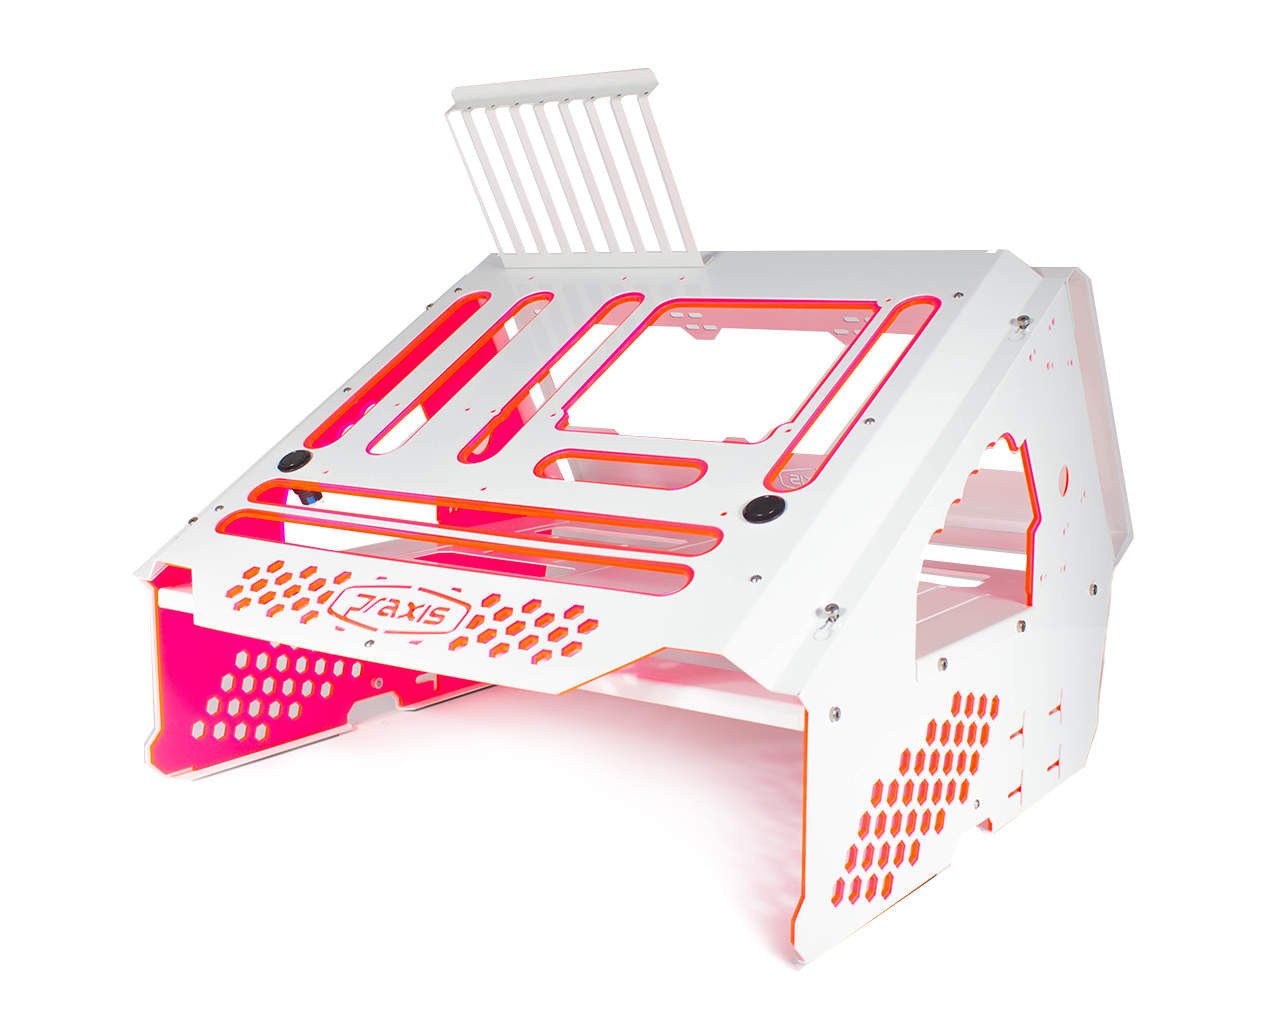 PrimoChill's Praxis Wetbench Powdercoated Steel Modular Open Air Computer Test Bench for Watercooling or Air Cooled Components - PrimoChill - KEEPING IT COOL White w/UV Red/Pink Accents